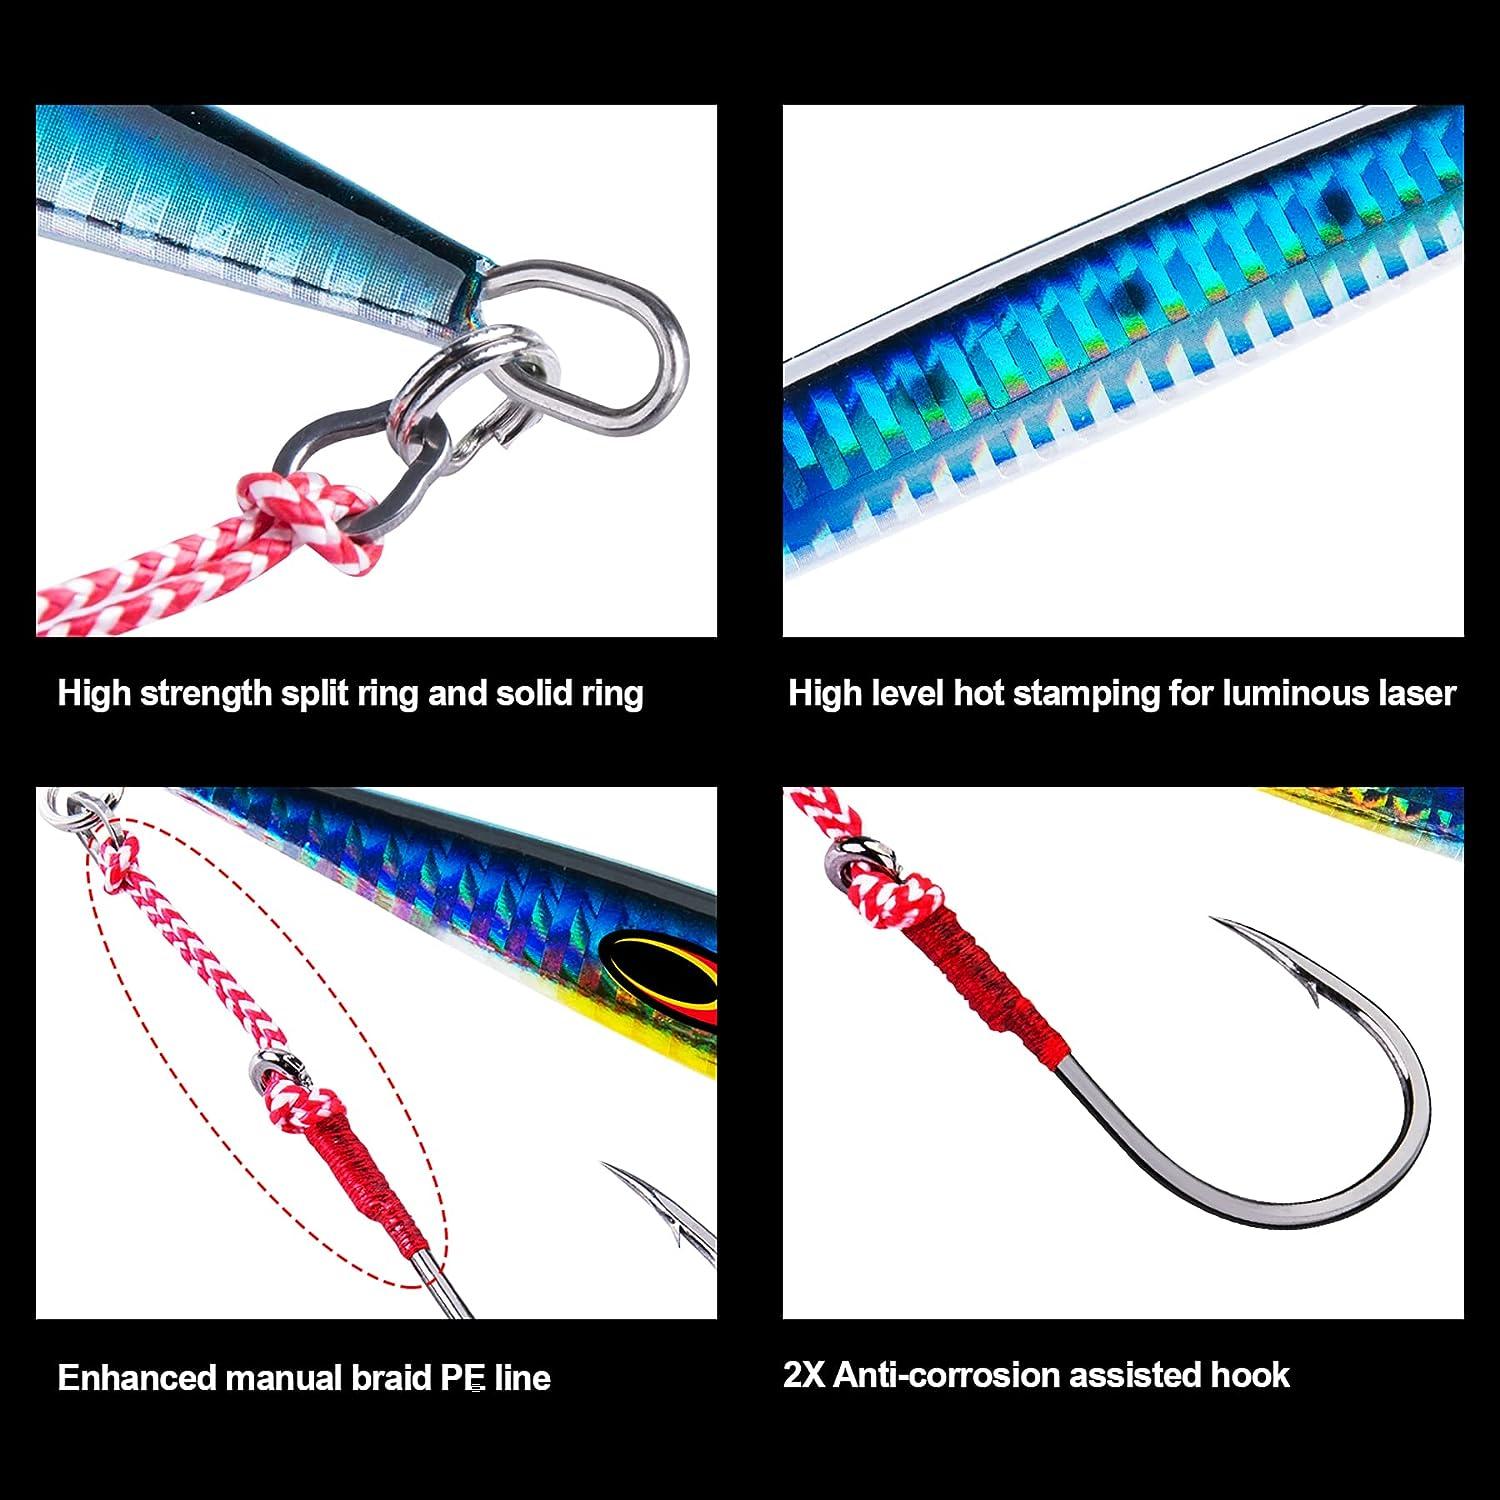 Goture Saltwater Jigs Fishing Lures,Vertical Slow Pitch Jigs Saltwater with Assist  Hook, Glow Stick Lead Jig for Tuna Salmon,Fishing Gear for Men Gifts 80g  100g 150g 200g 250g Saltwater Jigs-Multicolor 3Pcs 